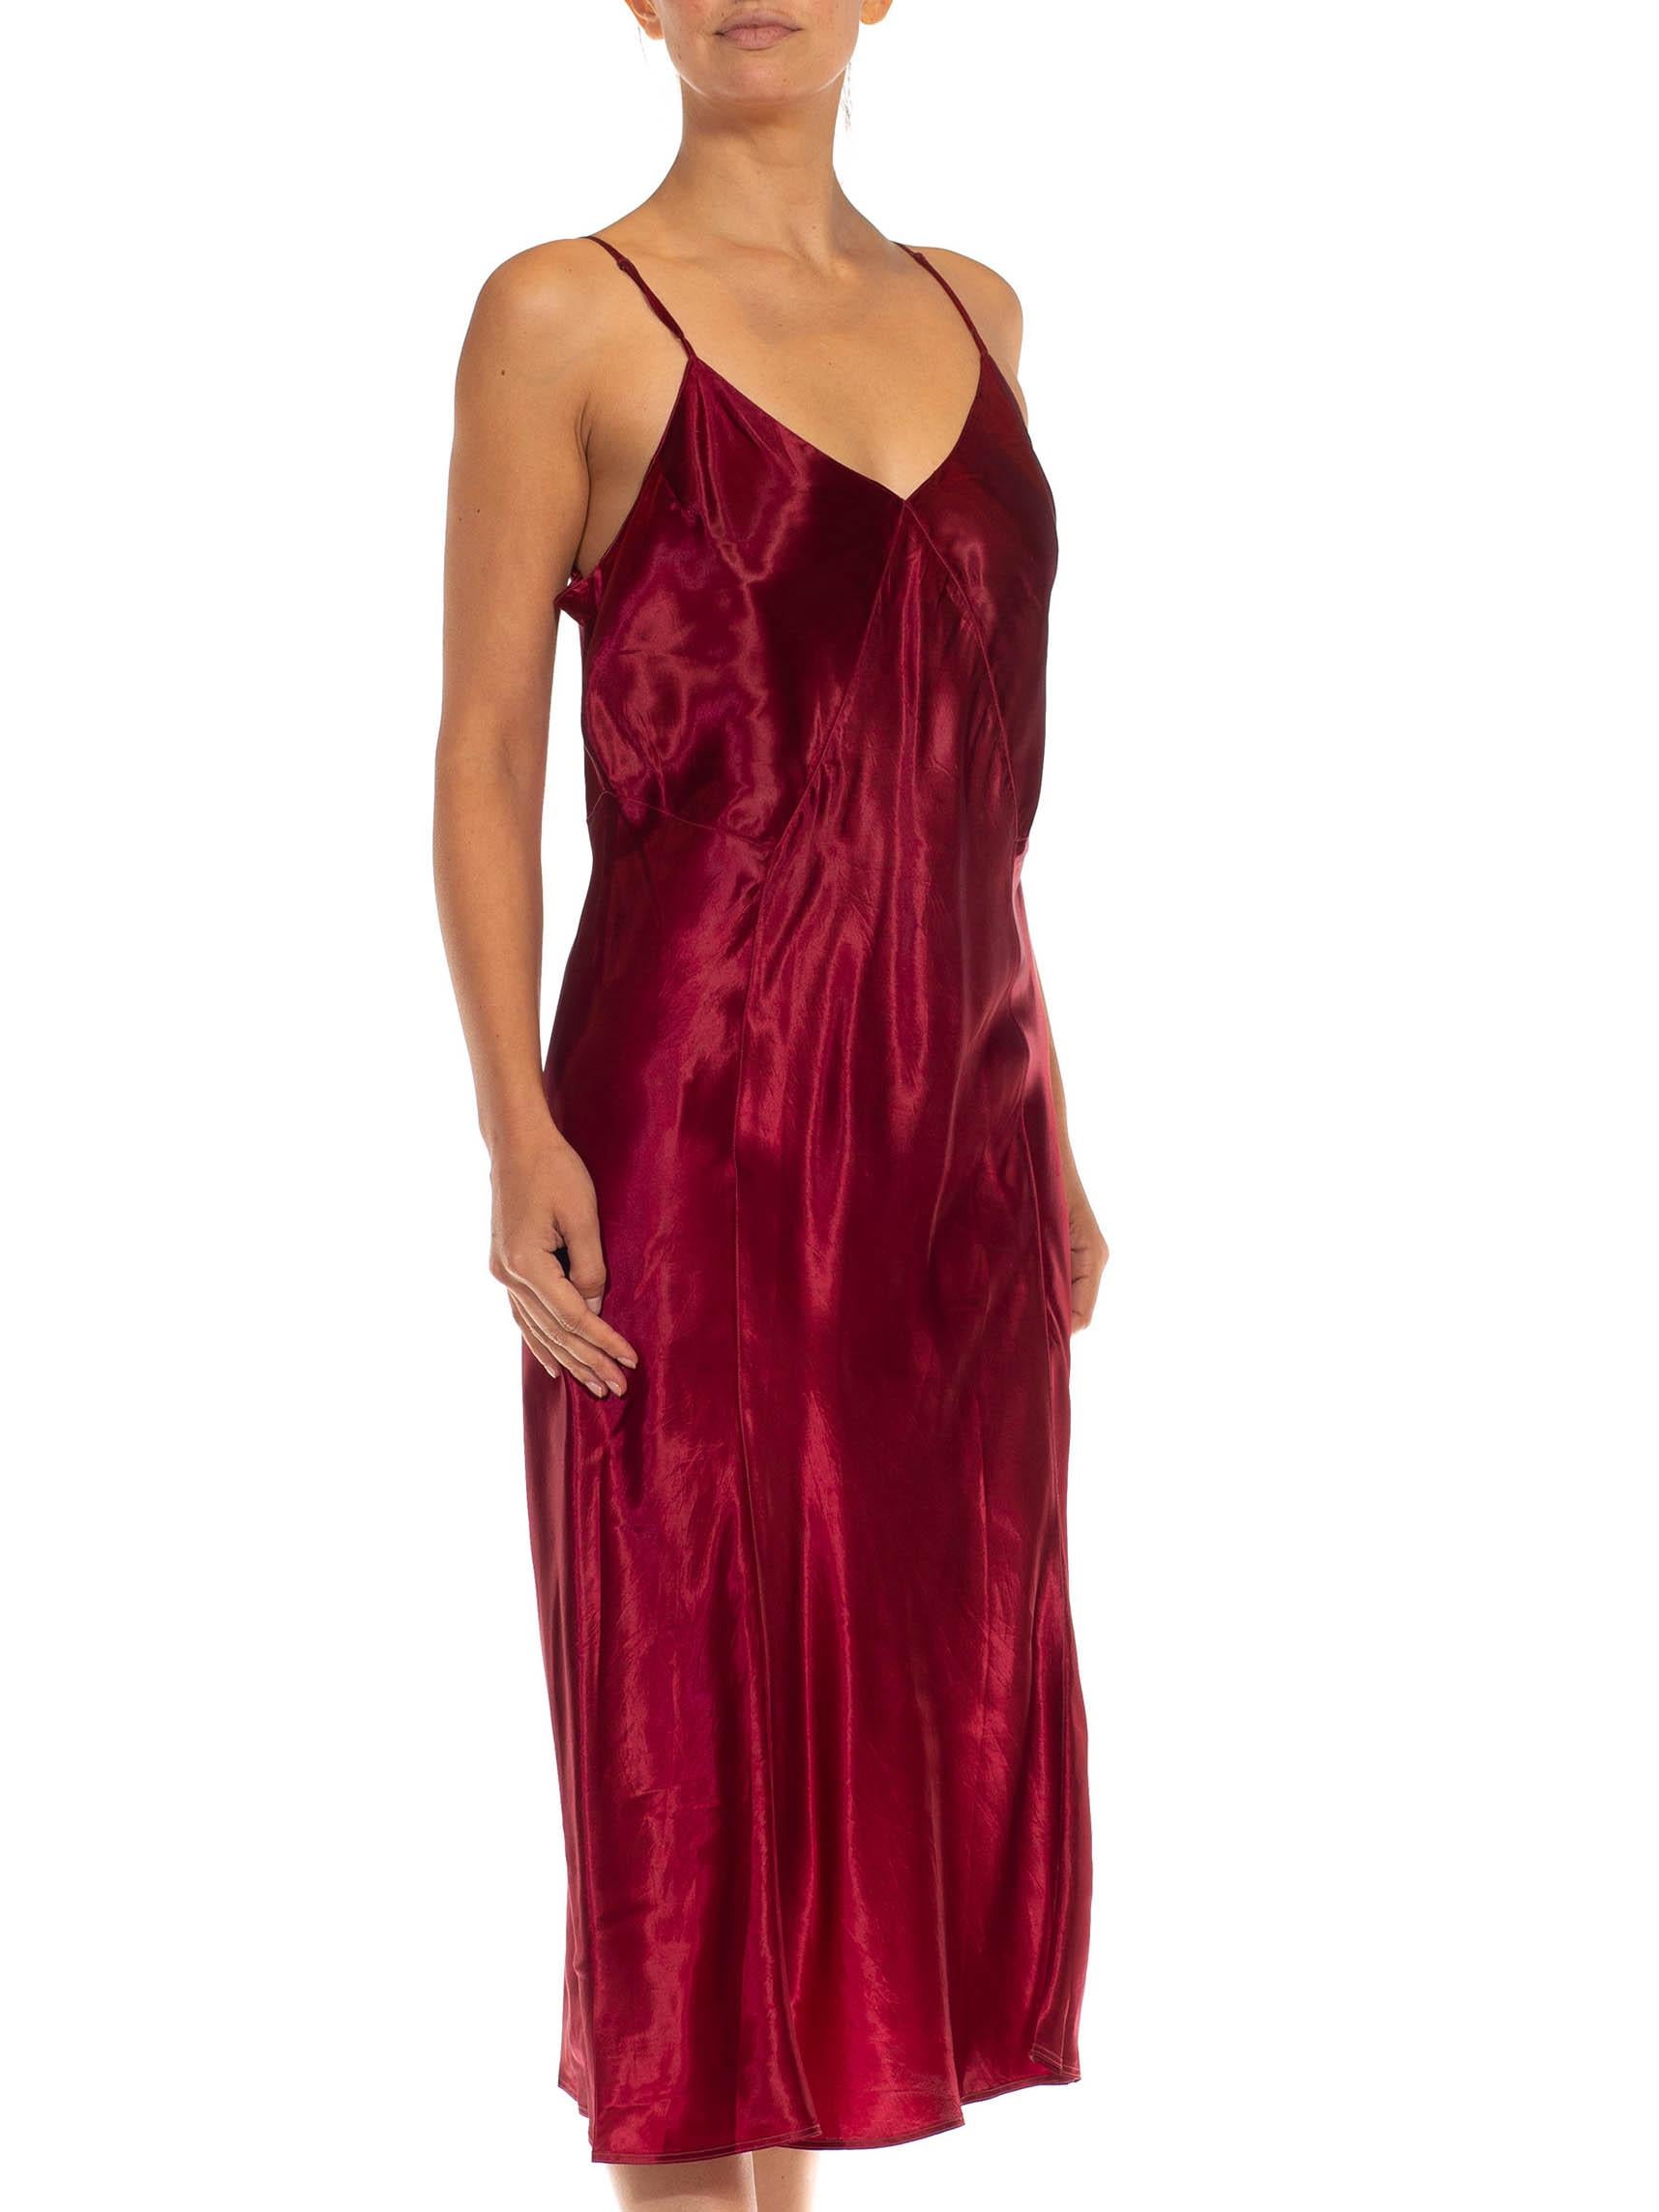 1930S Ruby Red Rayon Satin Bias Cut Slip Dress In Excellent Condition For Sale In New York, NY